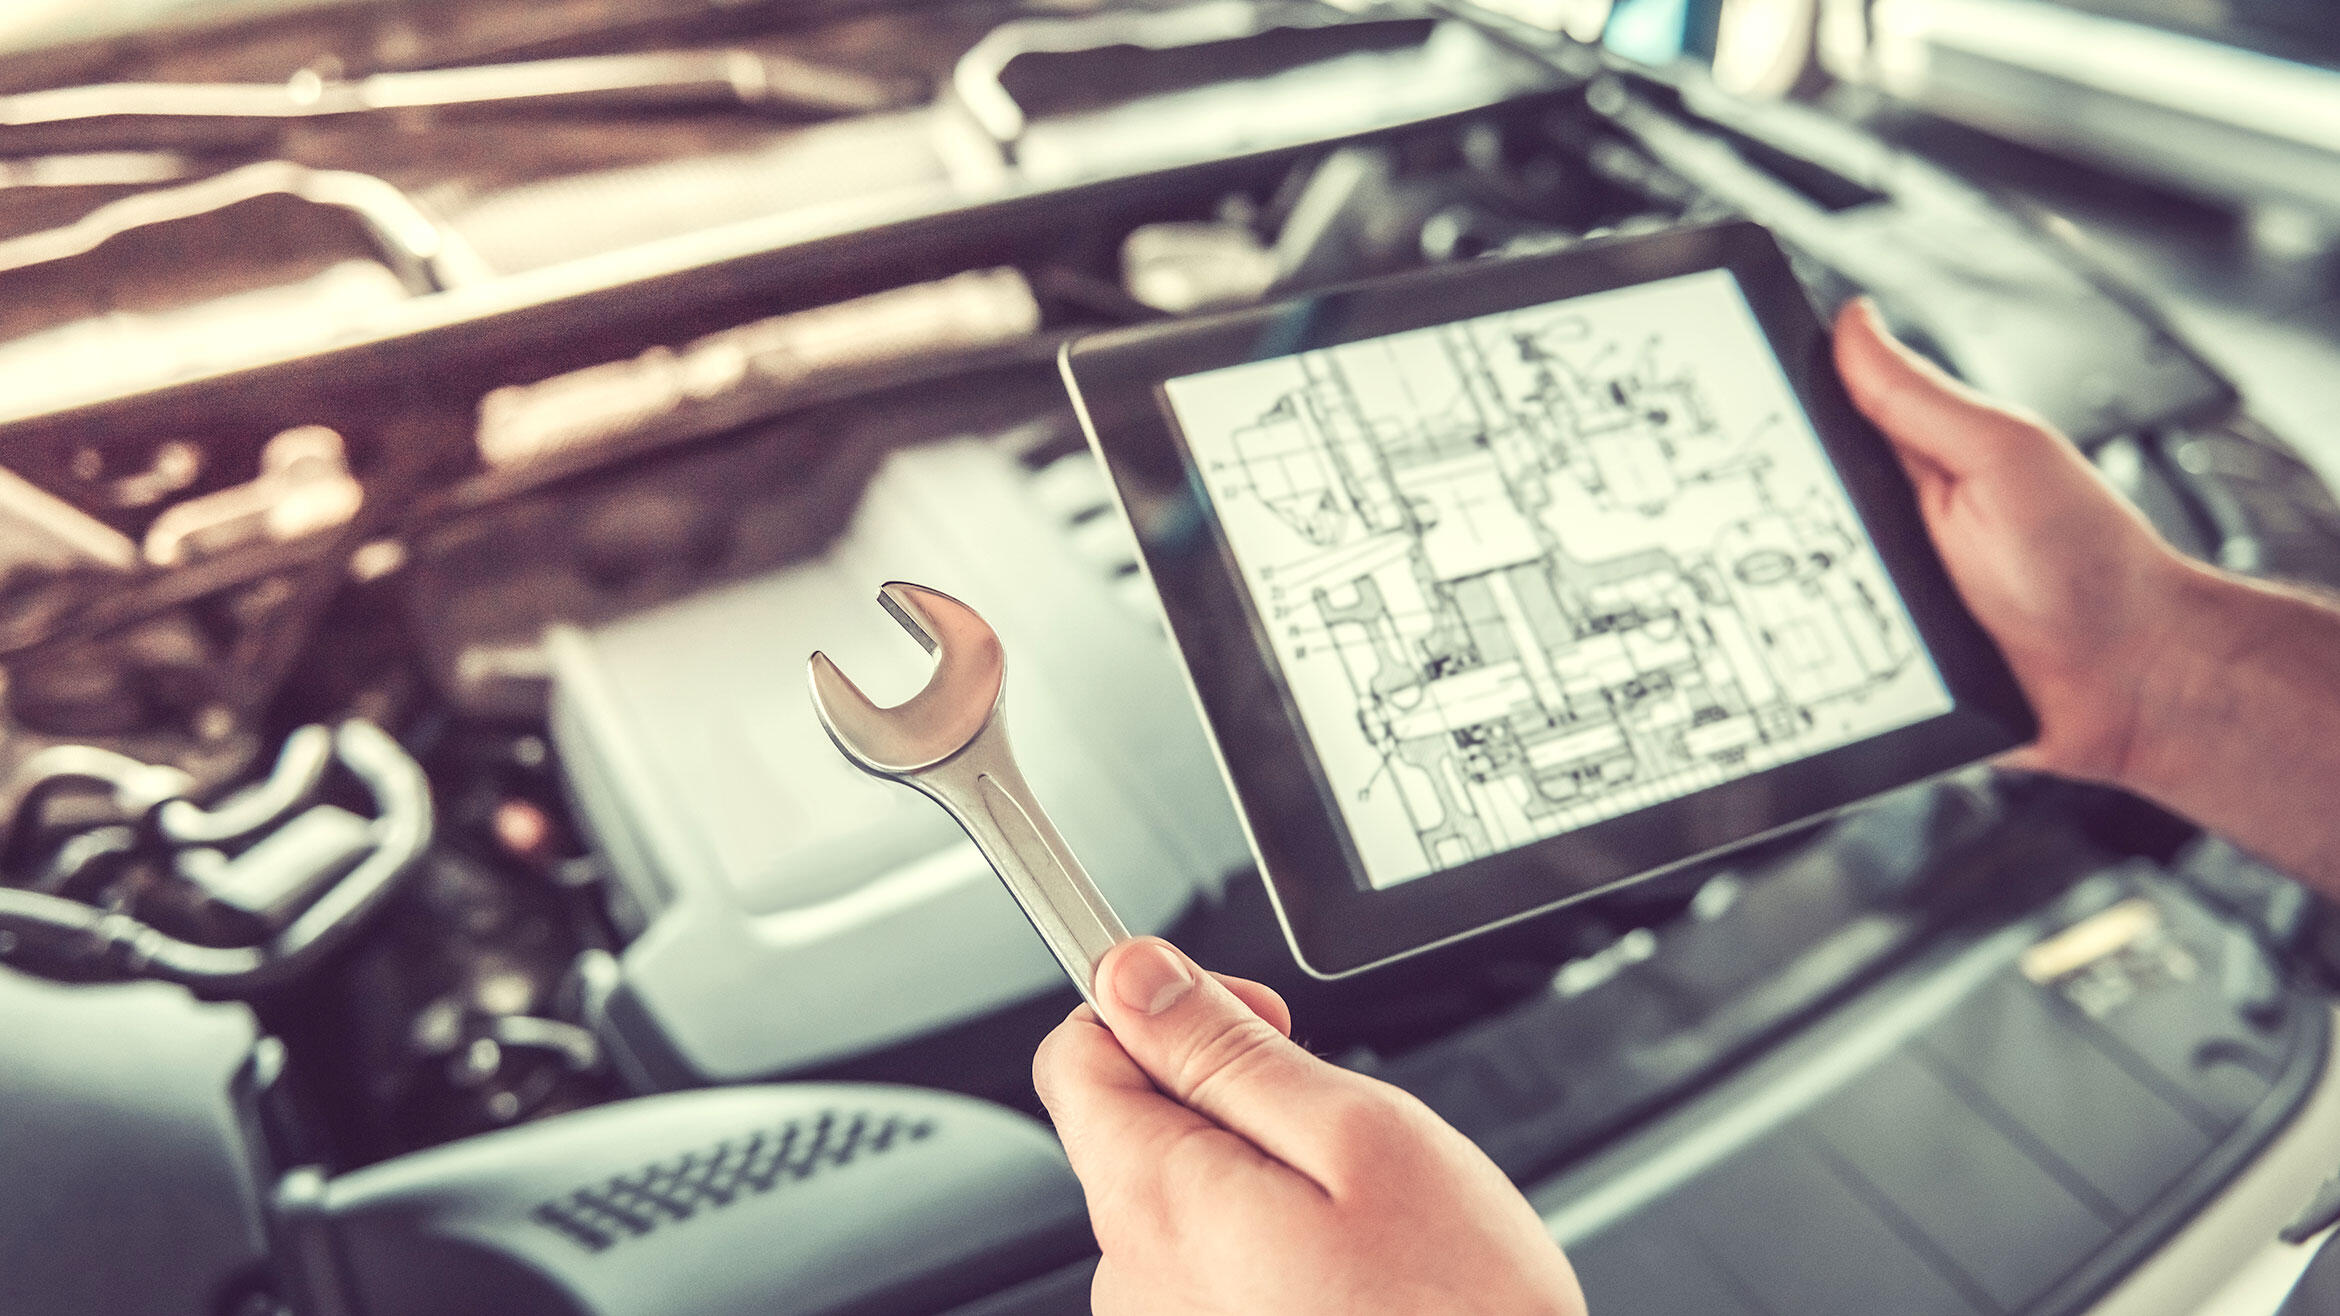 over a car engine, person holds a tablet in one hand and a spanner in the other